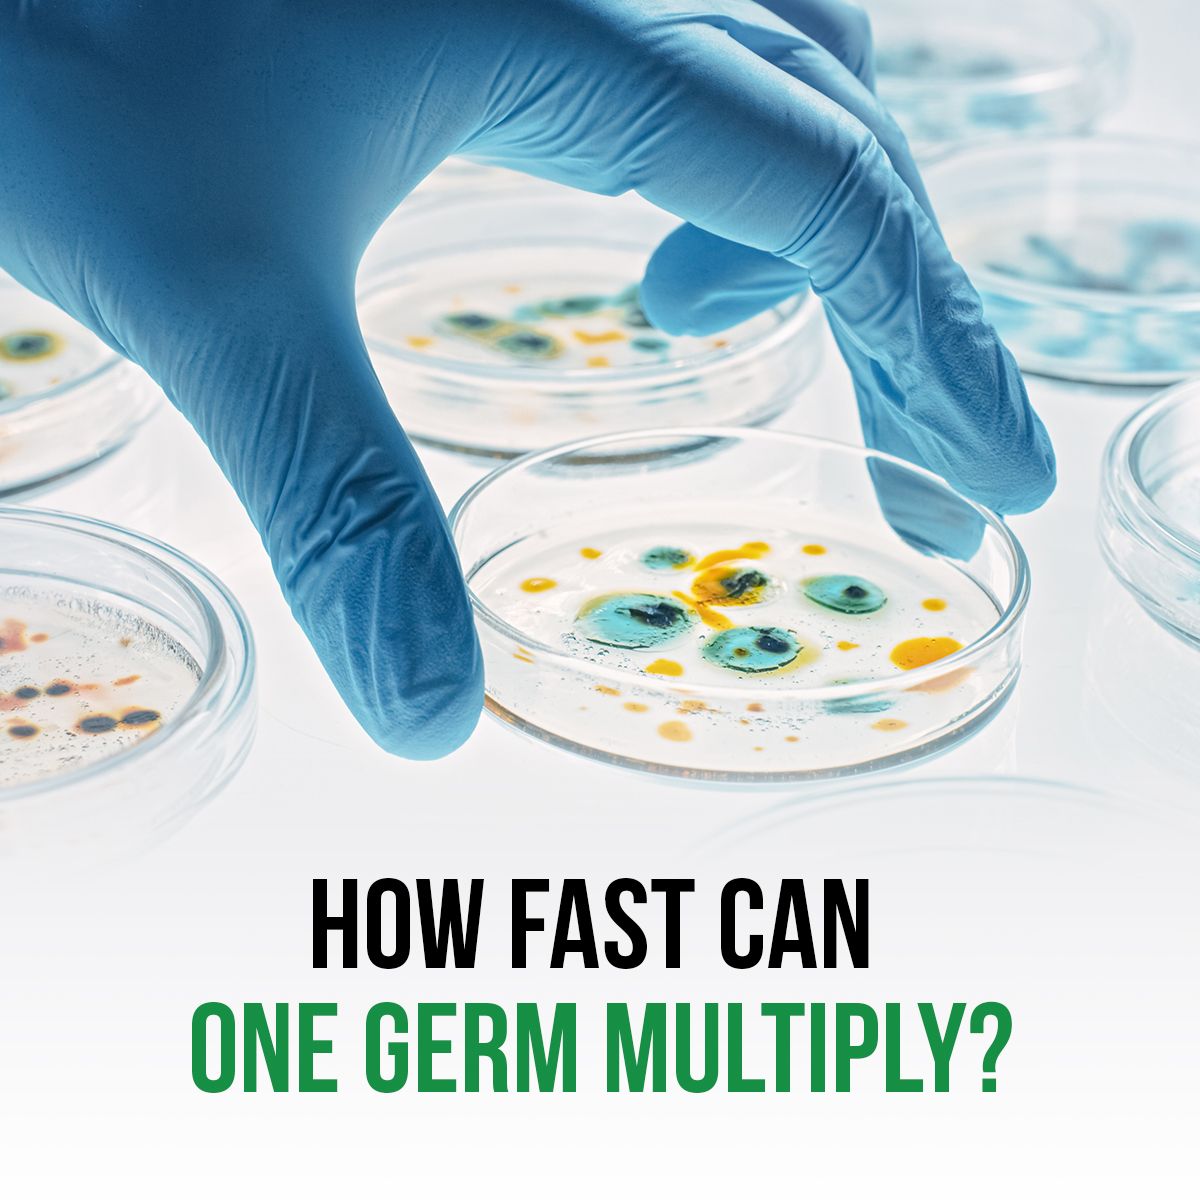 How Fast Can One Germ Multiply?